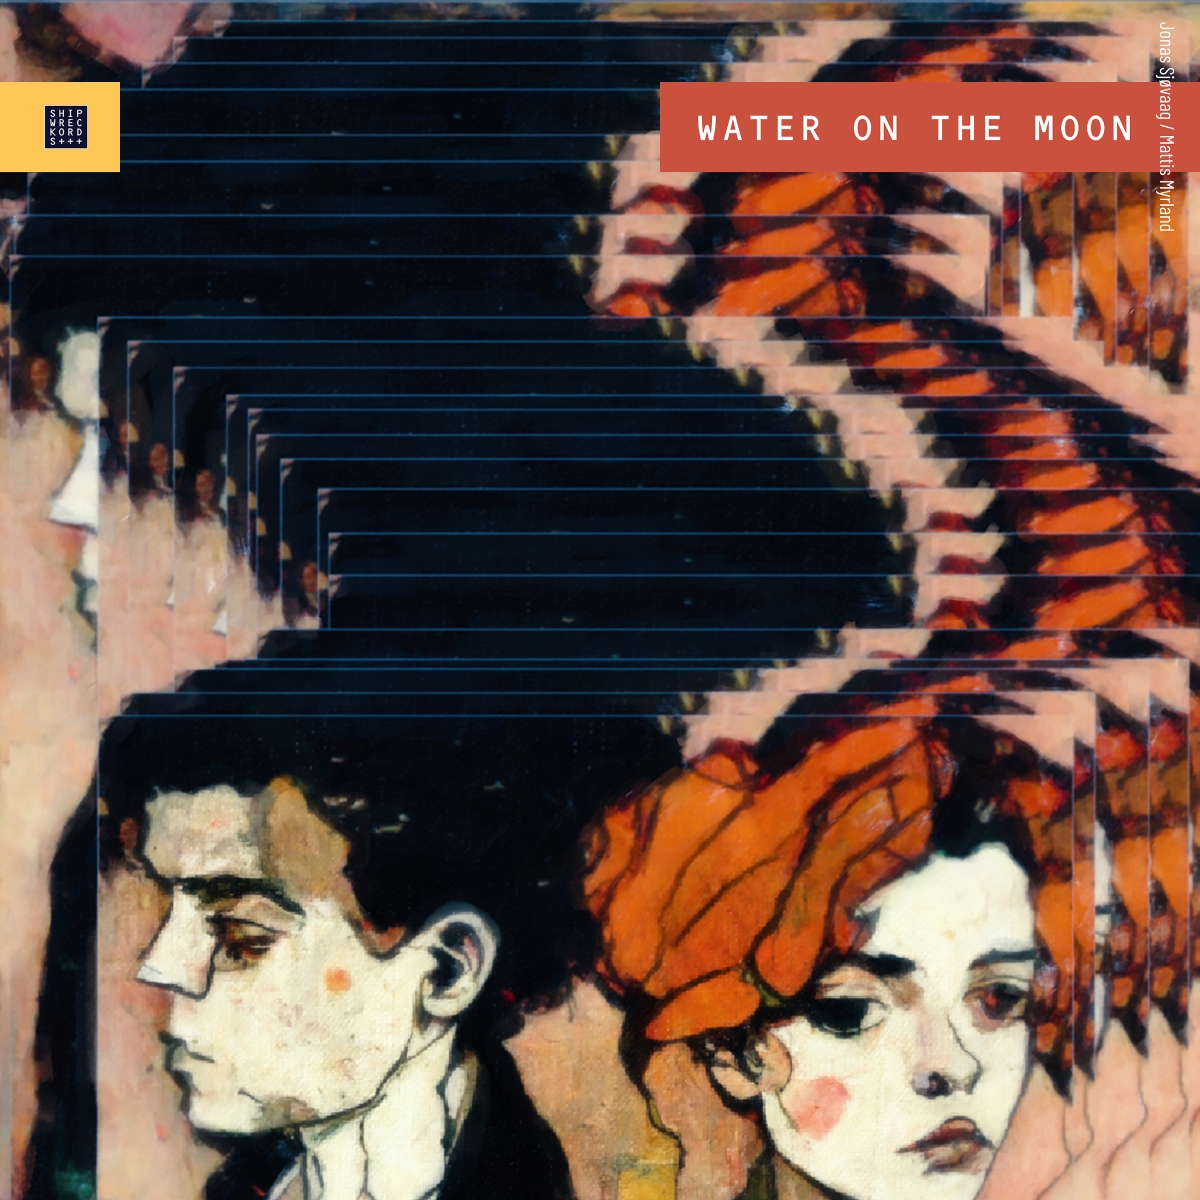 Water on the moon, album front cover